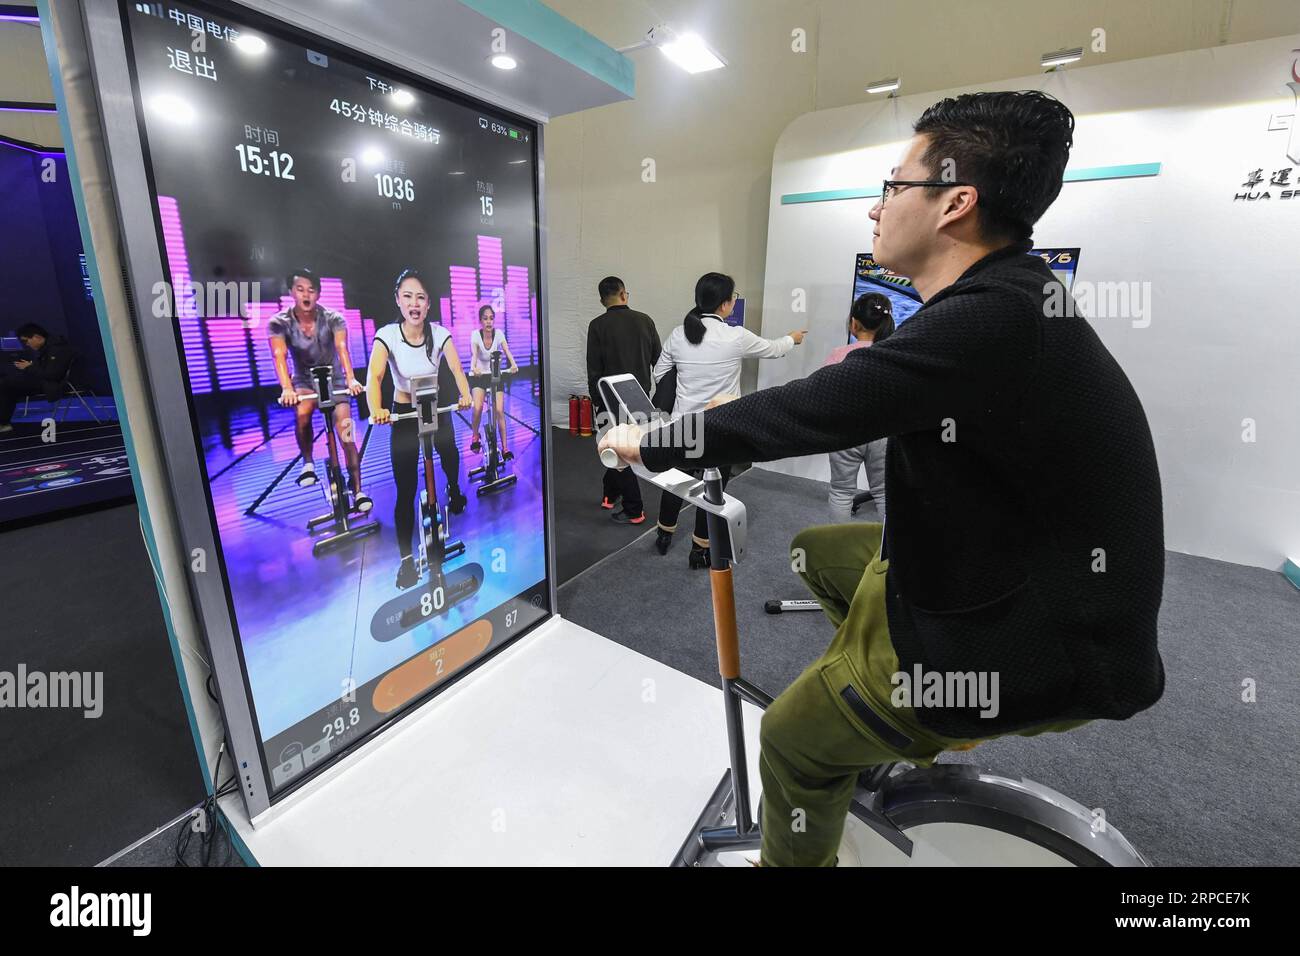 (190702) -- BEIJING, July 2, 2019 -- A staff member demonstrates a smart sport platform based on 5G technology during a 5G technology exhibition in Hangzhou, east China s Zhejiang Province, Jan. 19, 2019. ) Xinhua Headlines: China s greater opening promises shared prosperity XuxYu PUBLICATIONxNOTxINxCHN Stock Photo